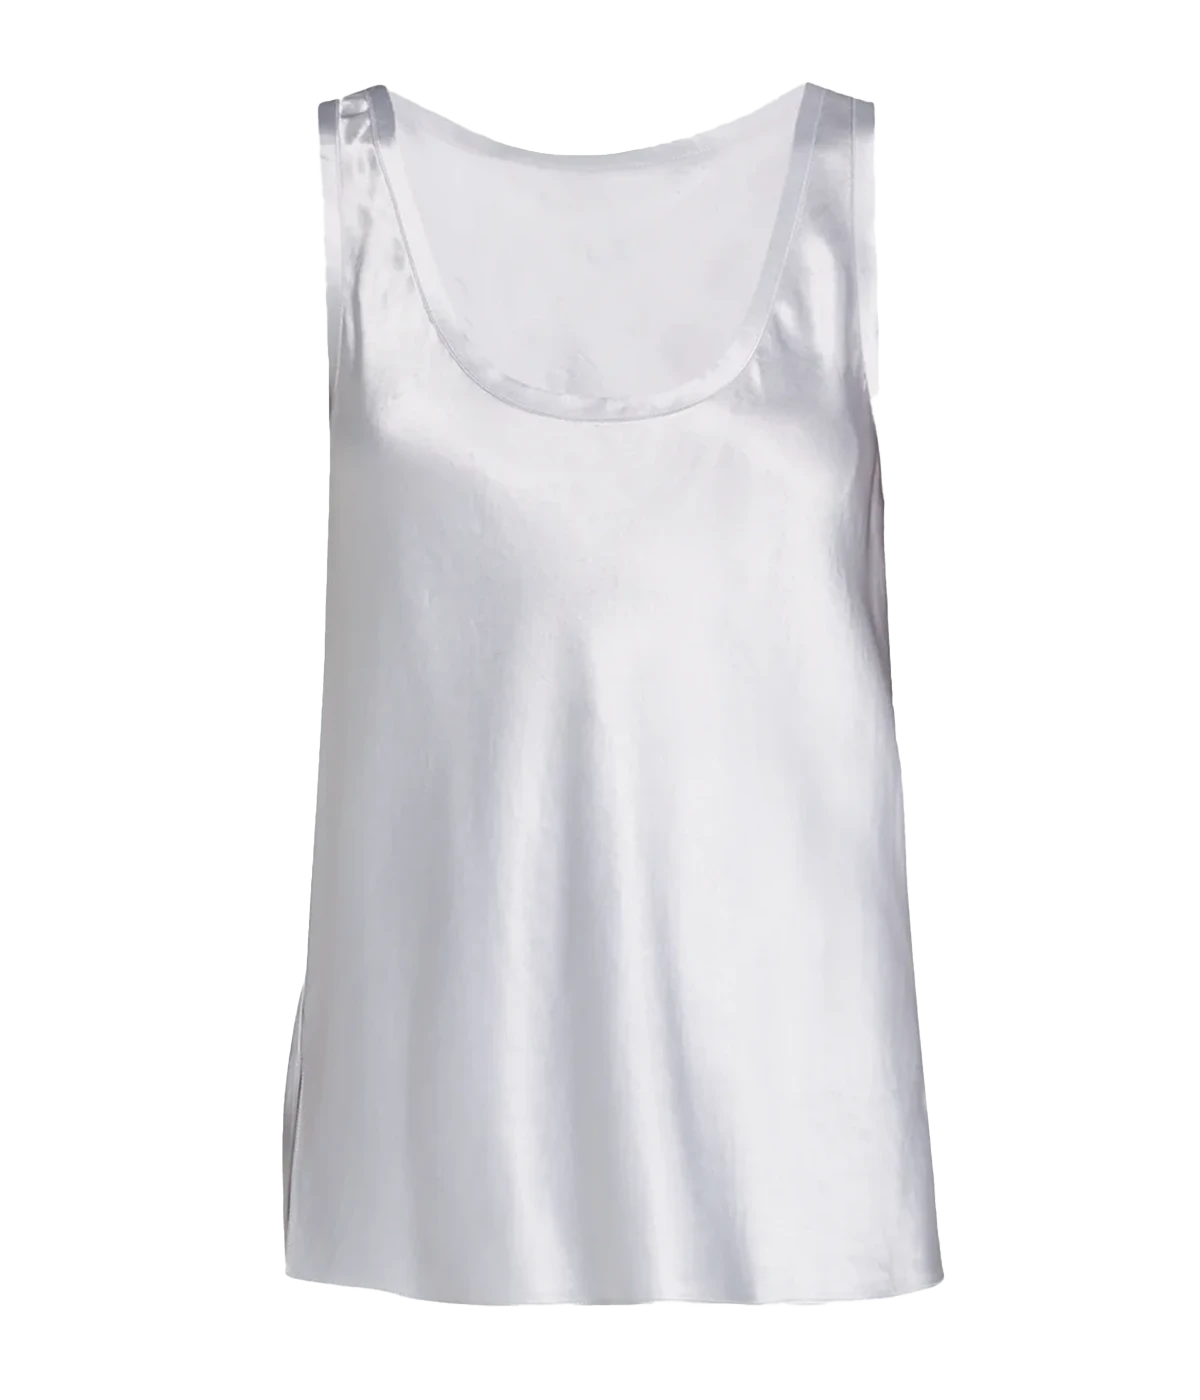 A lightweight scoop neck silver tank, perfect to style up or down. Versatile, this is the perfect summer piece for your next relaxed event or party. A bra-friendly, loose top. 